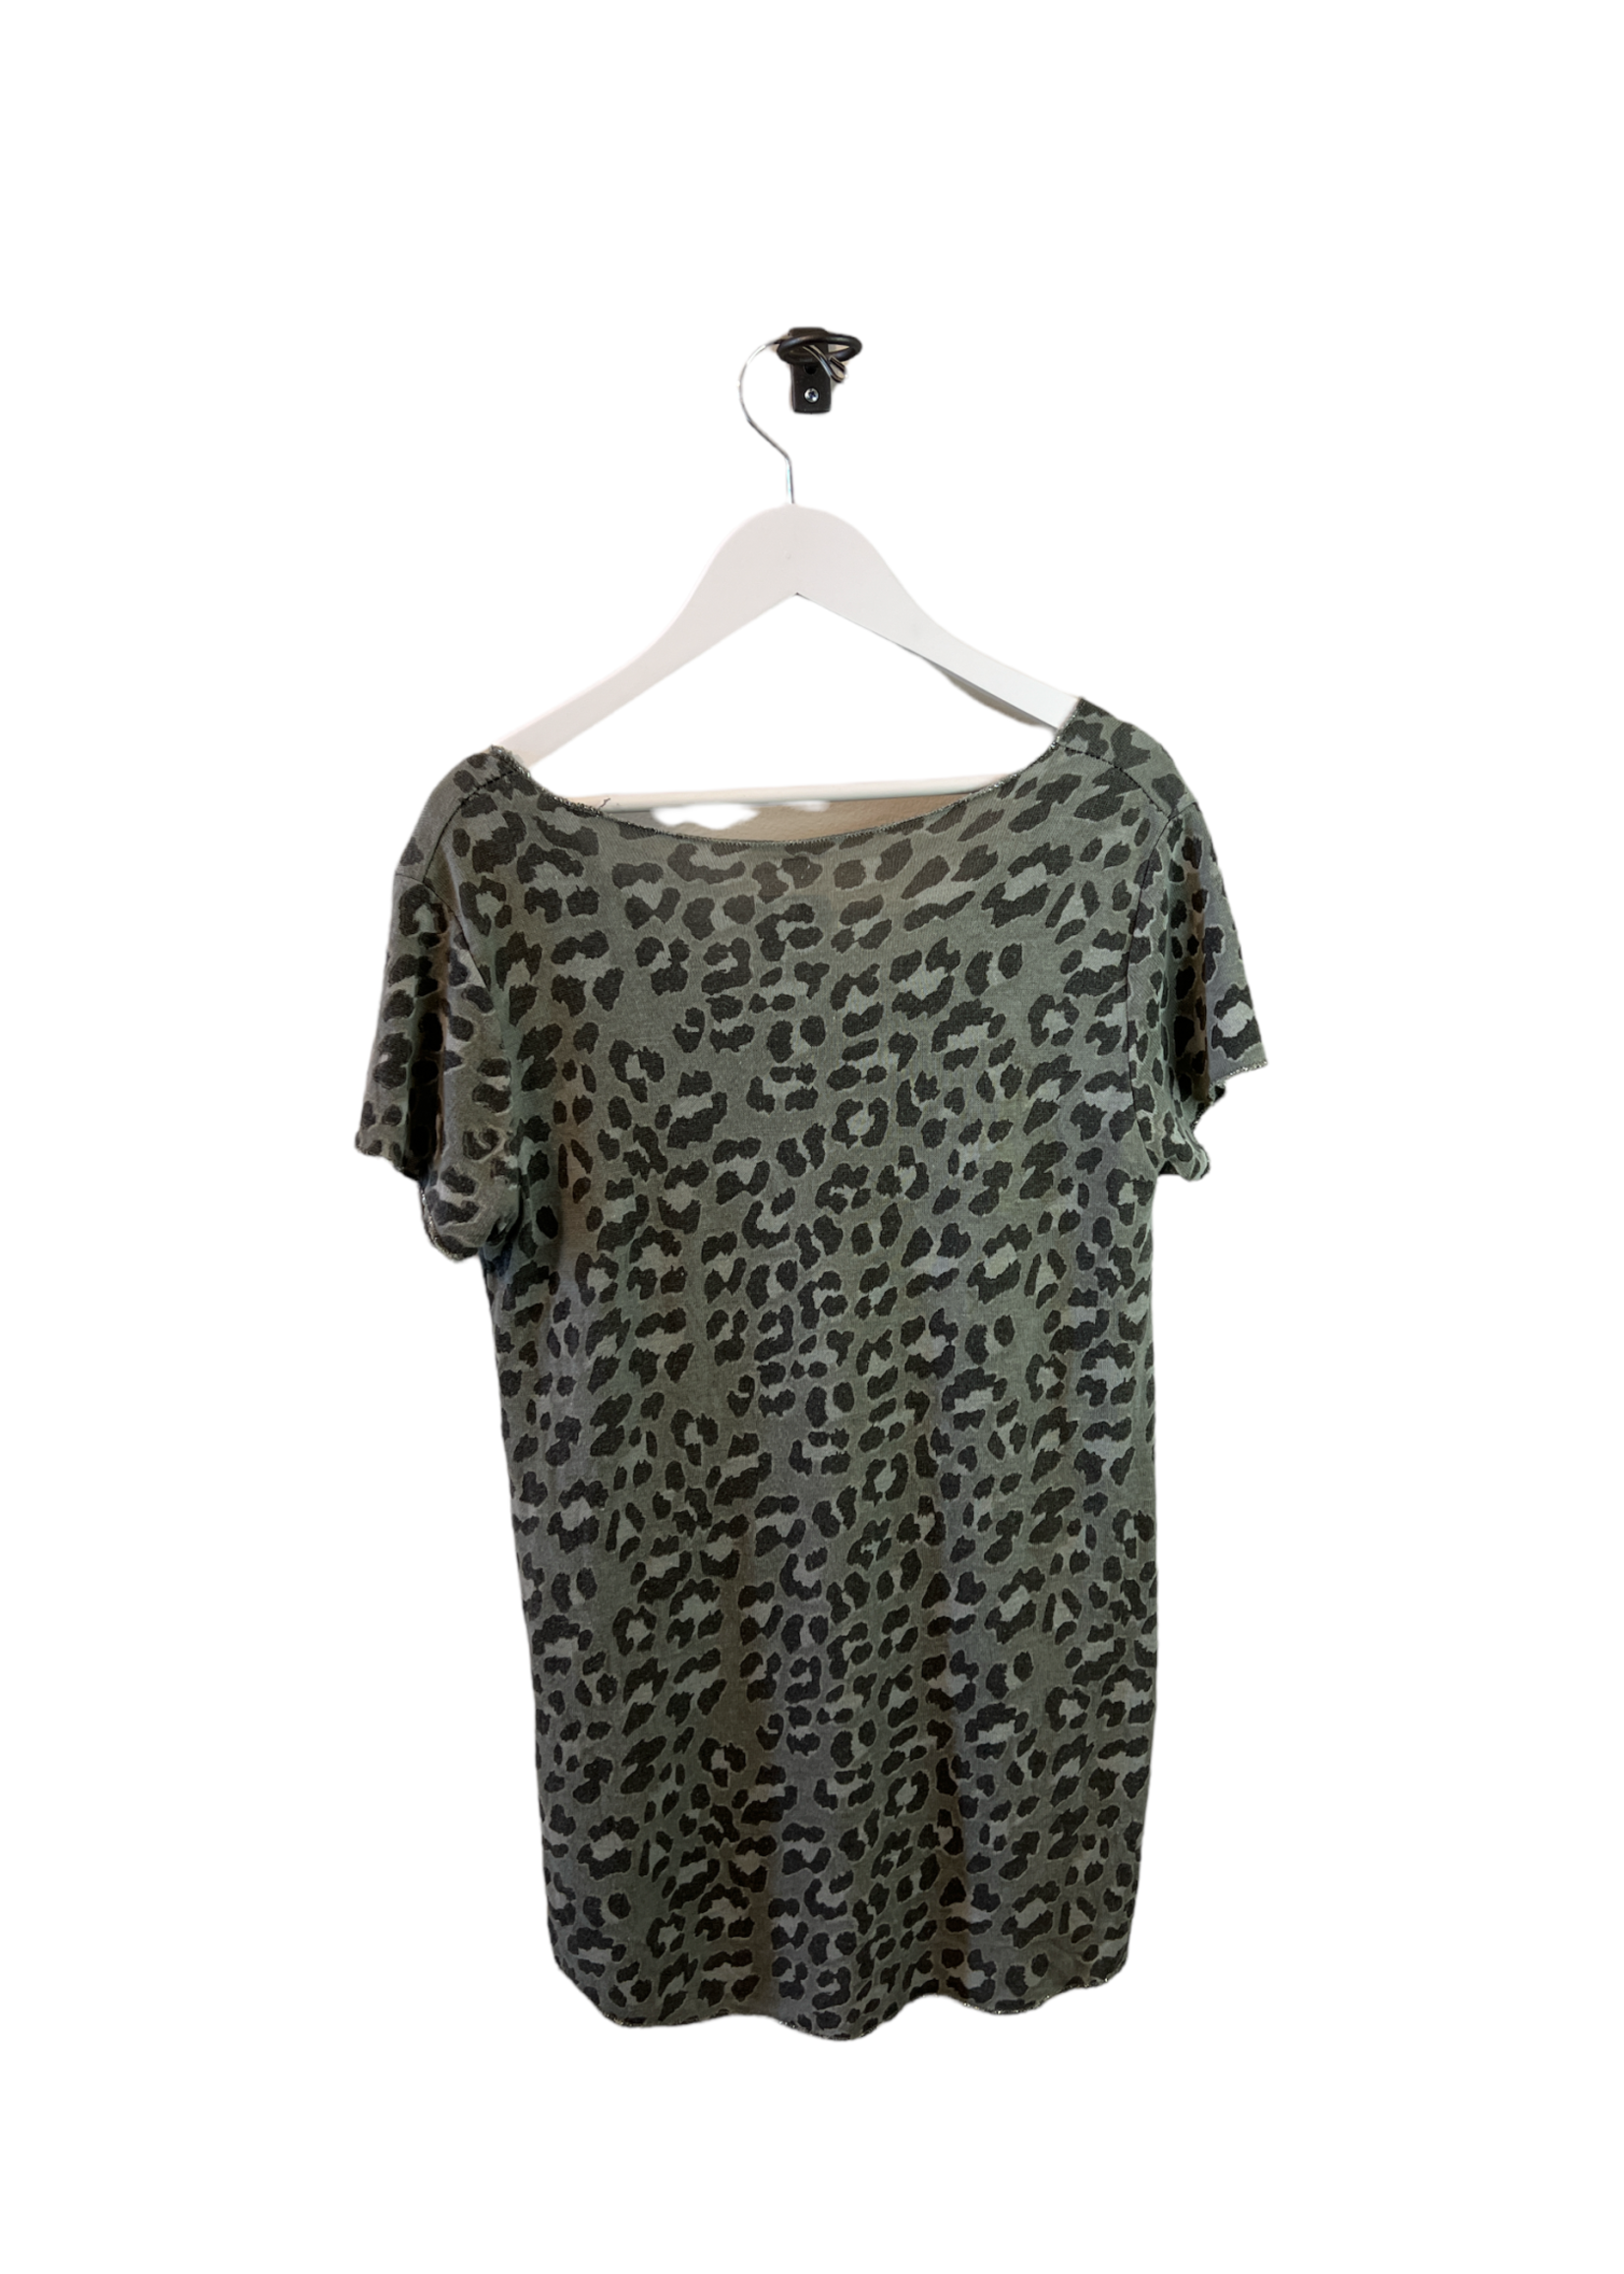 MADE IN ITALY CHEETAH PRINT T-SHIRT- SIZE S